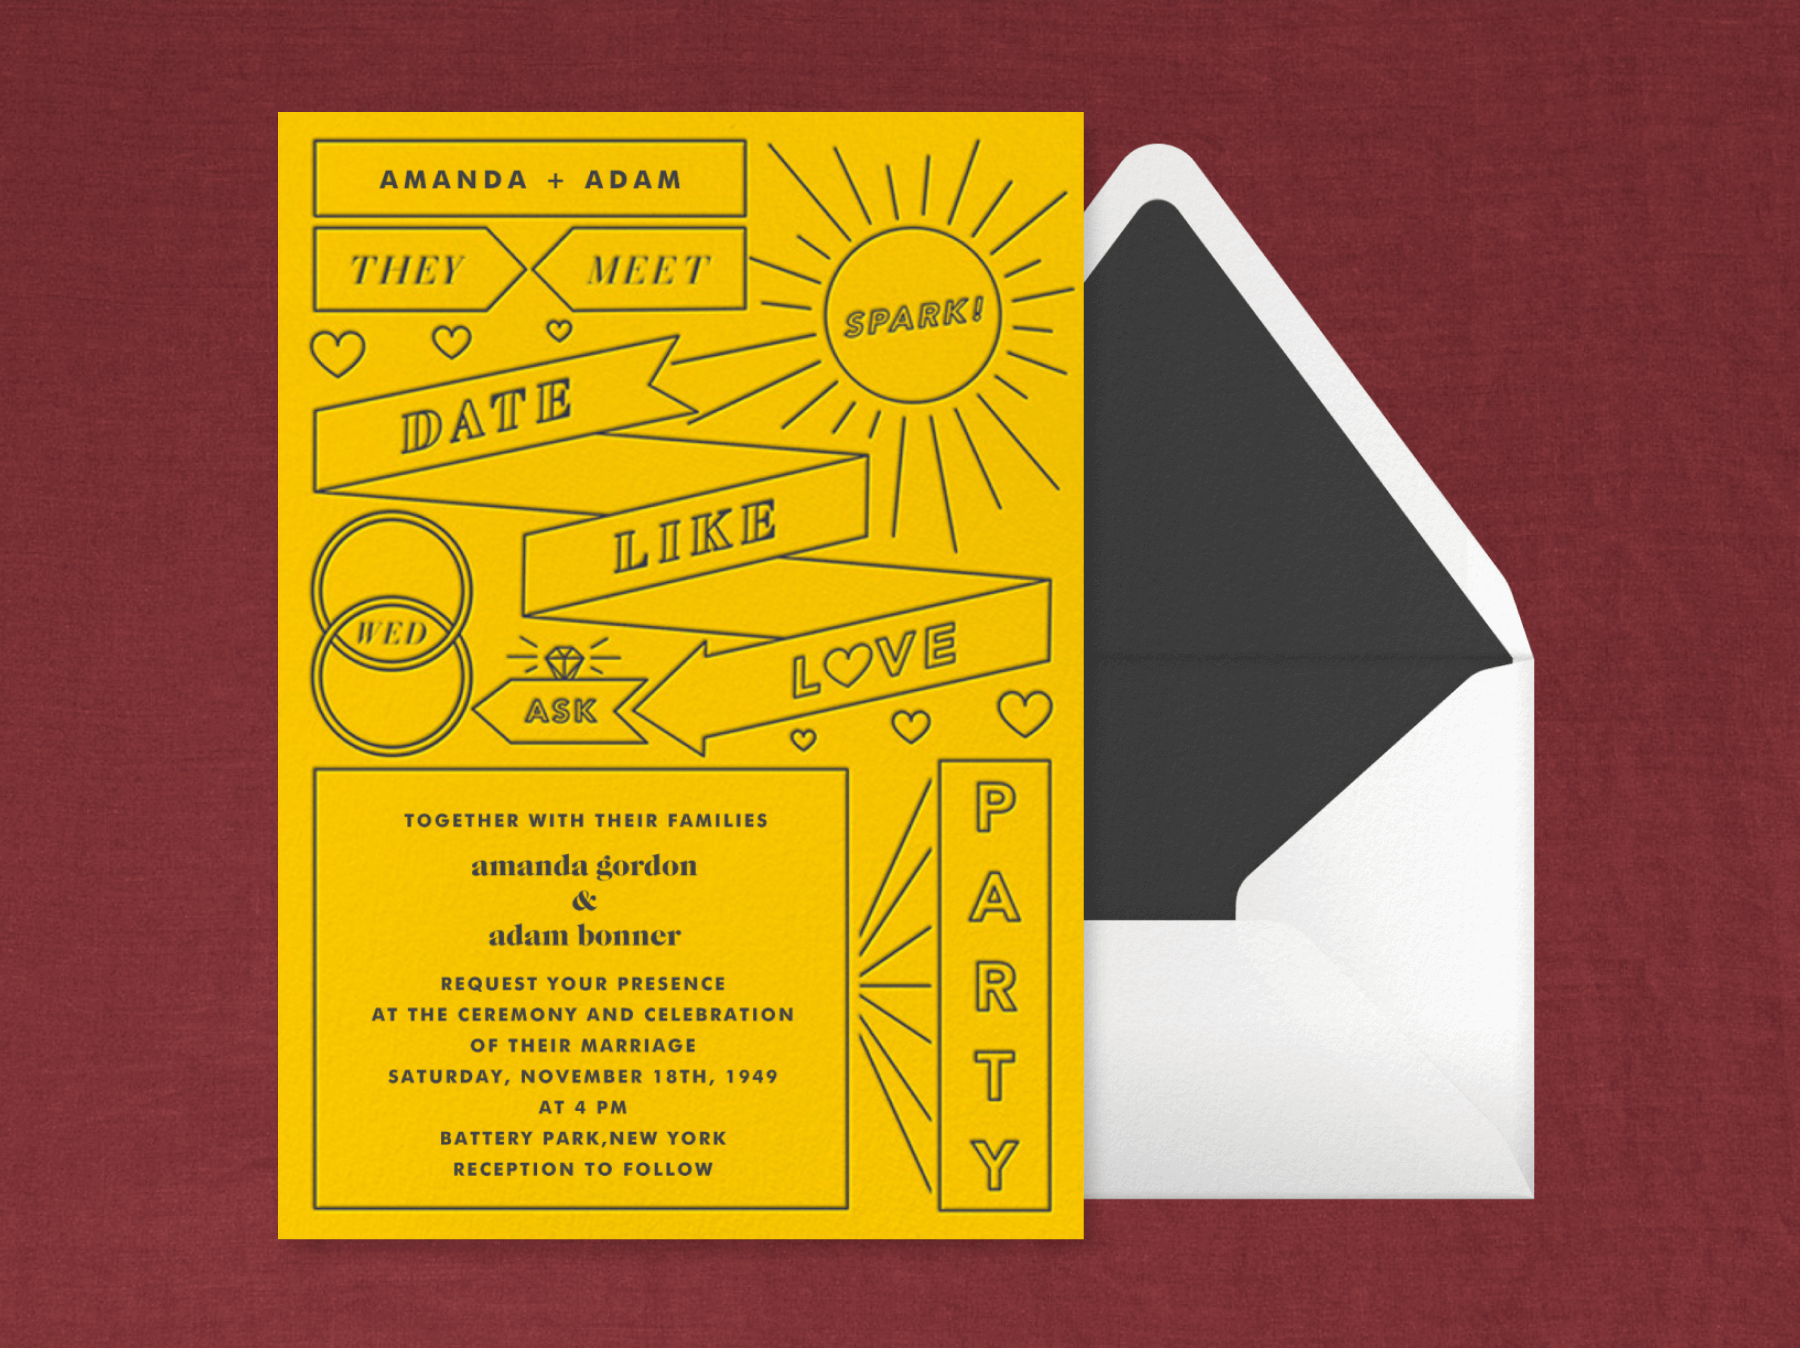 A vertical yellow wedding invitation with an infographic design showing the event details. It’s paired with a white envelope and black lining.